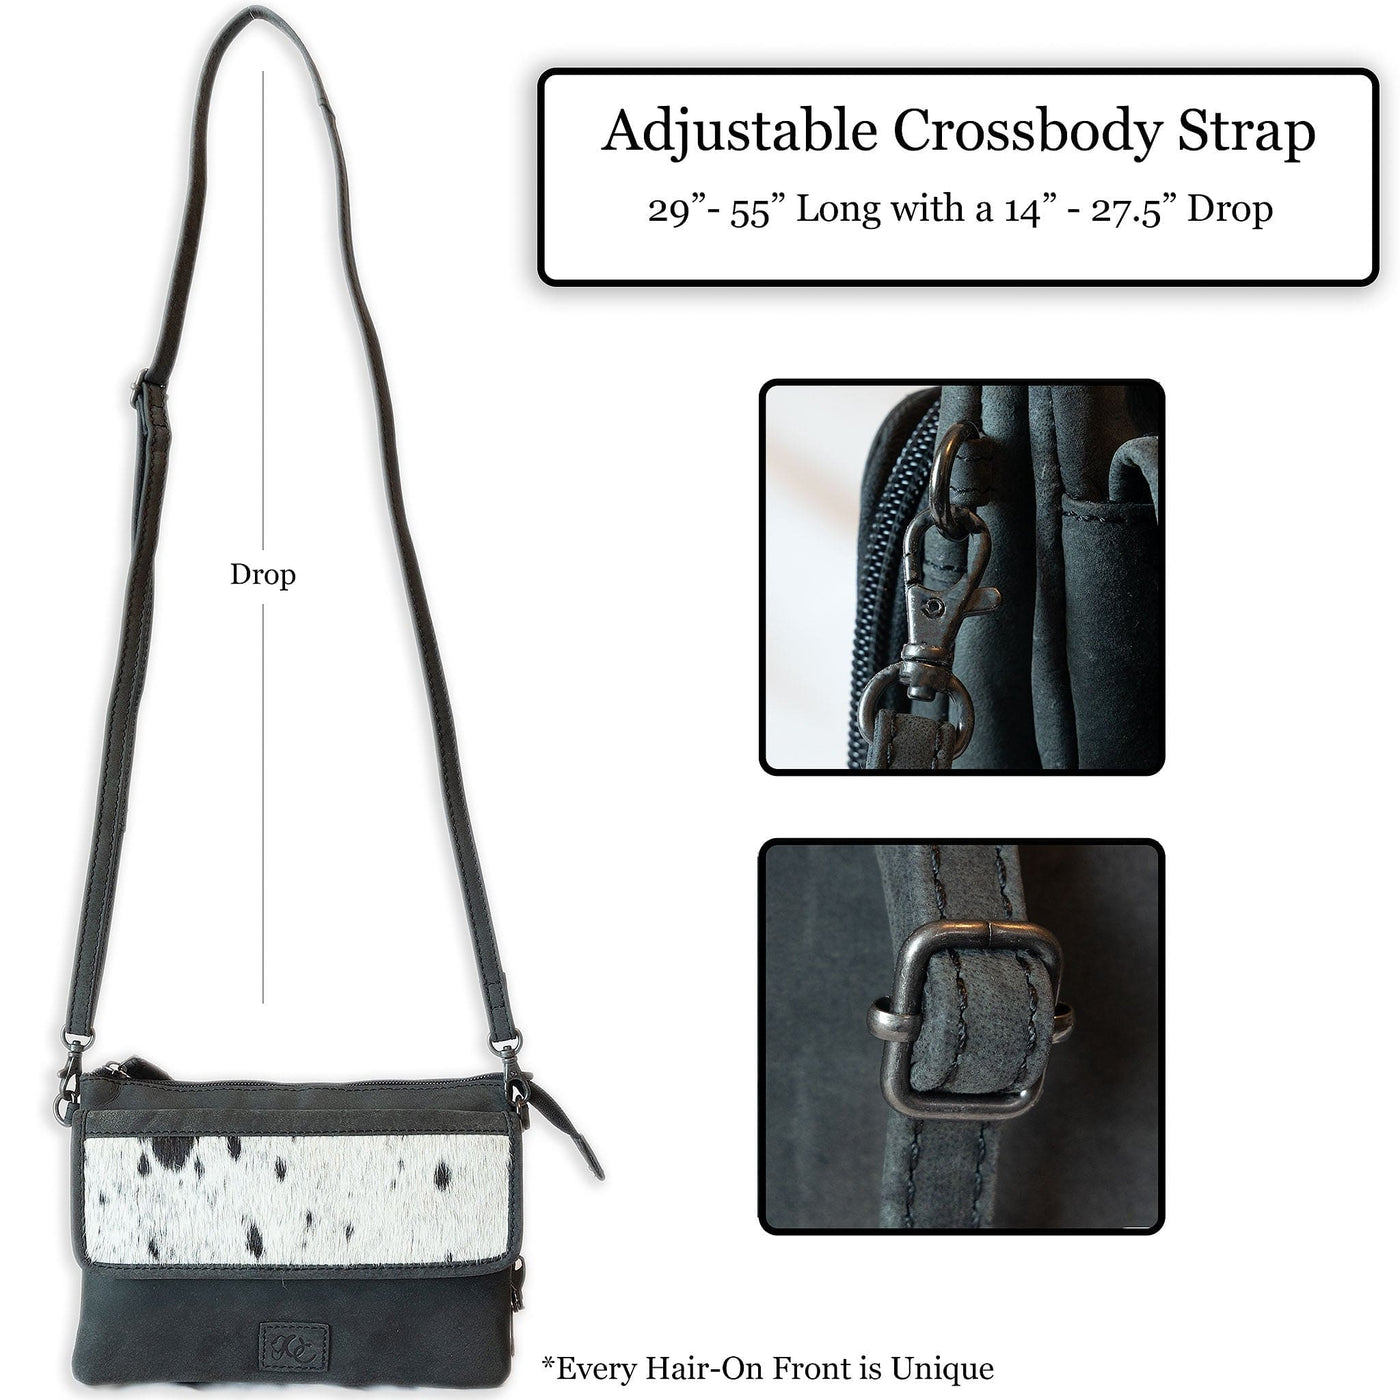 UC Leather Crossbody Bag - 	 concealed carry crossbody purse -  Gun Bag Cowboy Leather -  Unique Hide Crossbody Gun and Pistol Bag -  crossbody bag for concealed gun carry -  Unique Cowboy Leather Crossbody gun bag - 	 concealed carry crossbody leather gun purse -  concealed carry crossbody cowboy leather gun purse with locking zipper -  concealed carry purse for woman